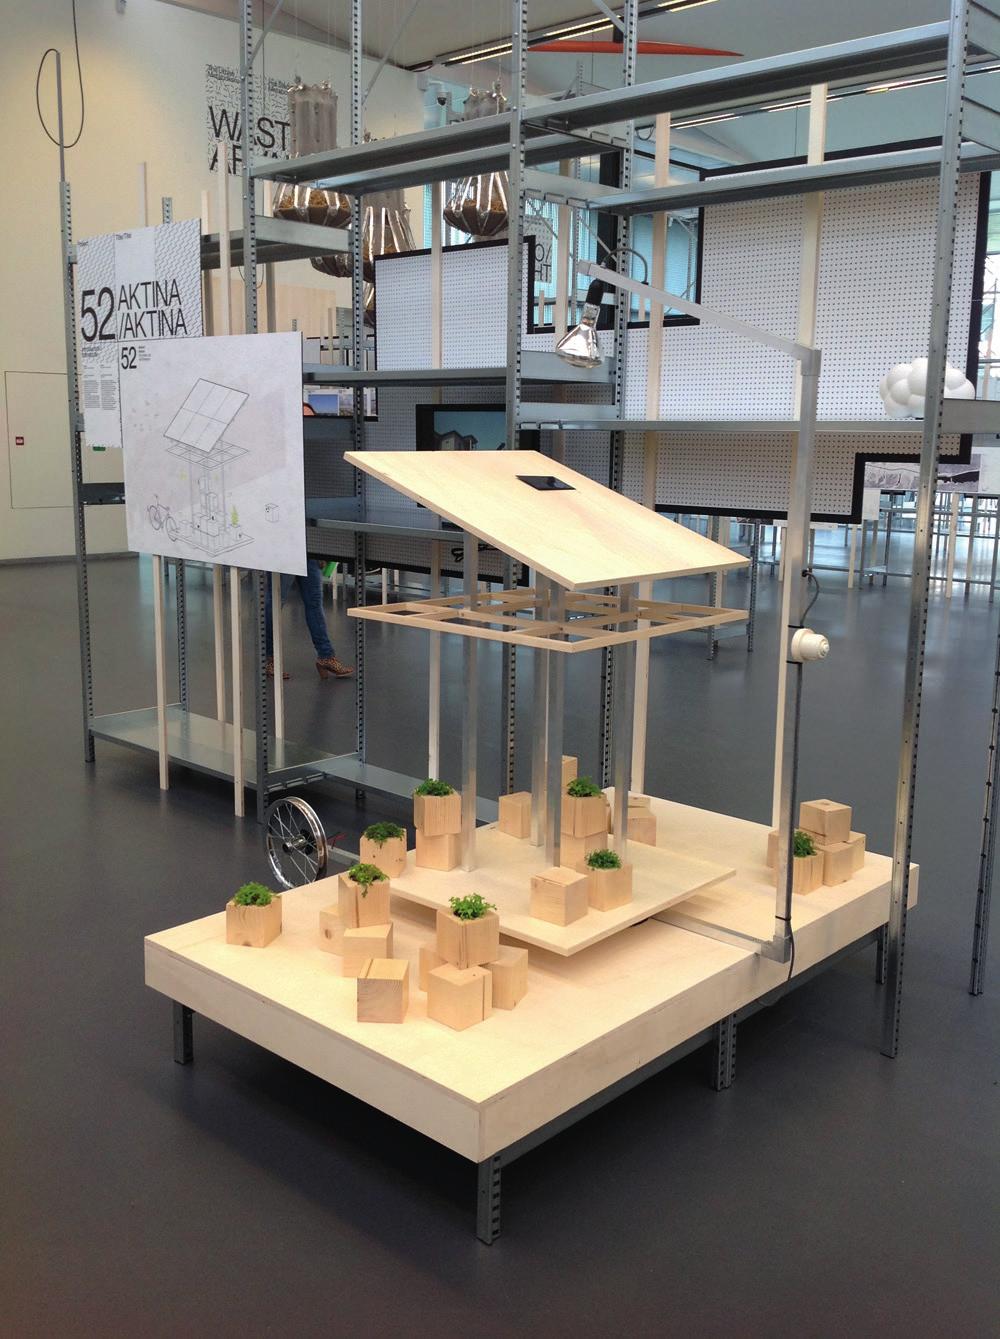 The project s ideas travel abroad, as AKTINA*MINI, a 1:4 scale model constructed to be presented in IABR 2014 Urban by Nature biennale exhibition, which (June-August 2014) took place in Kunsthal,